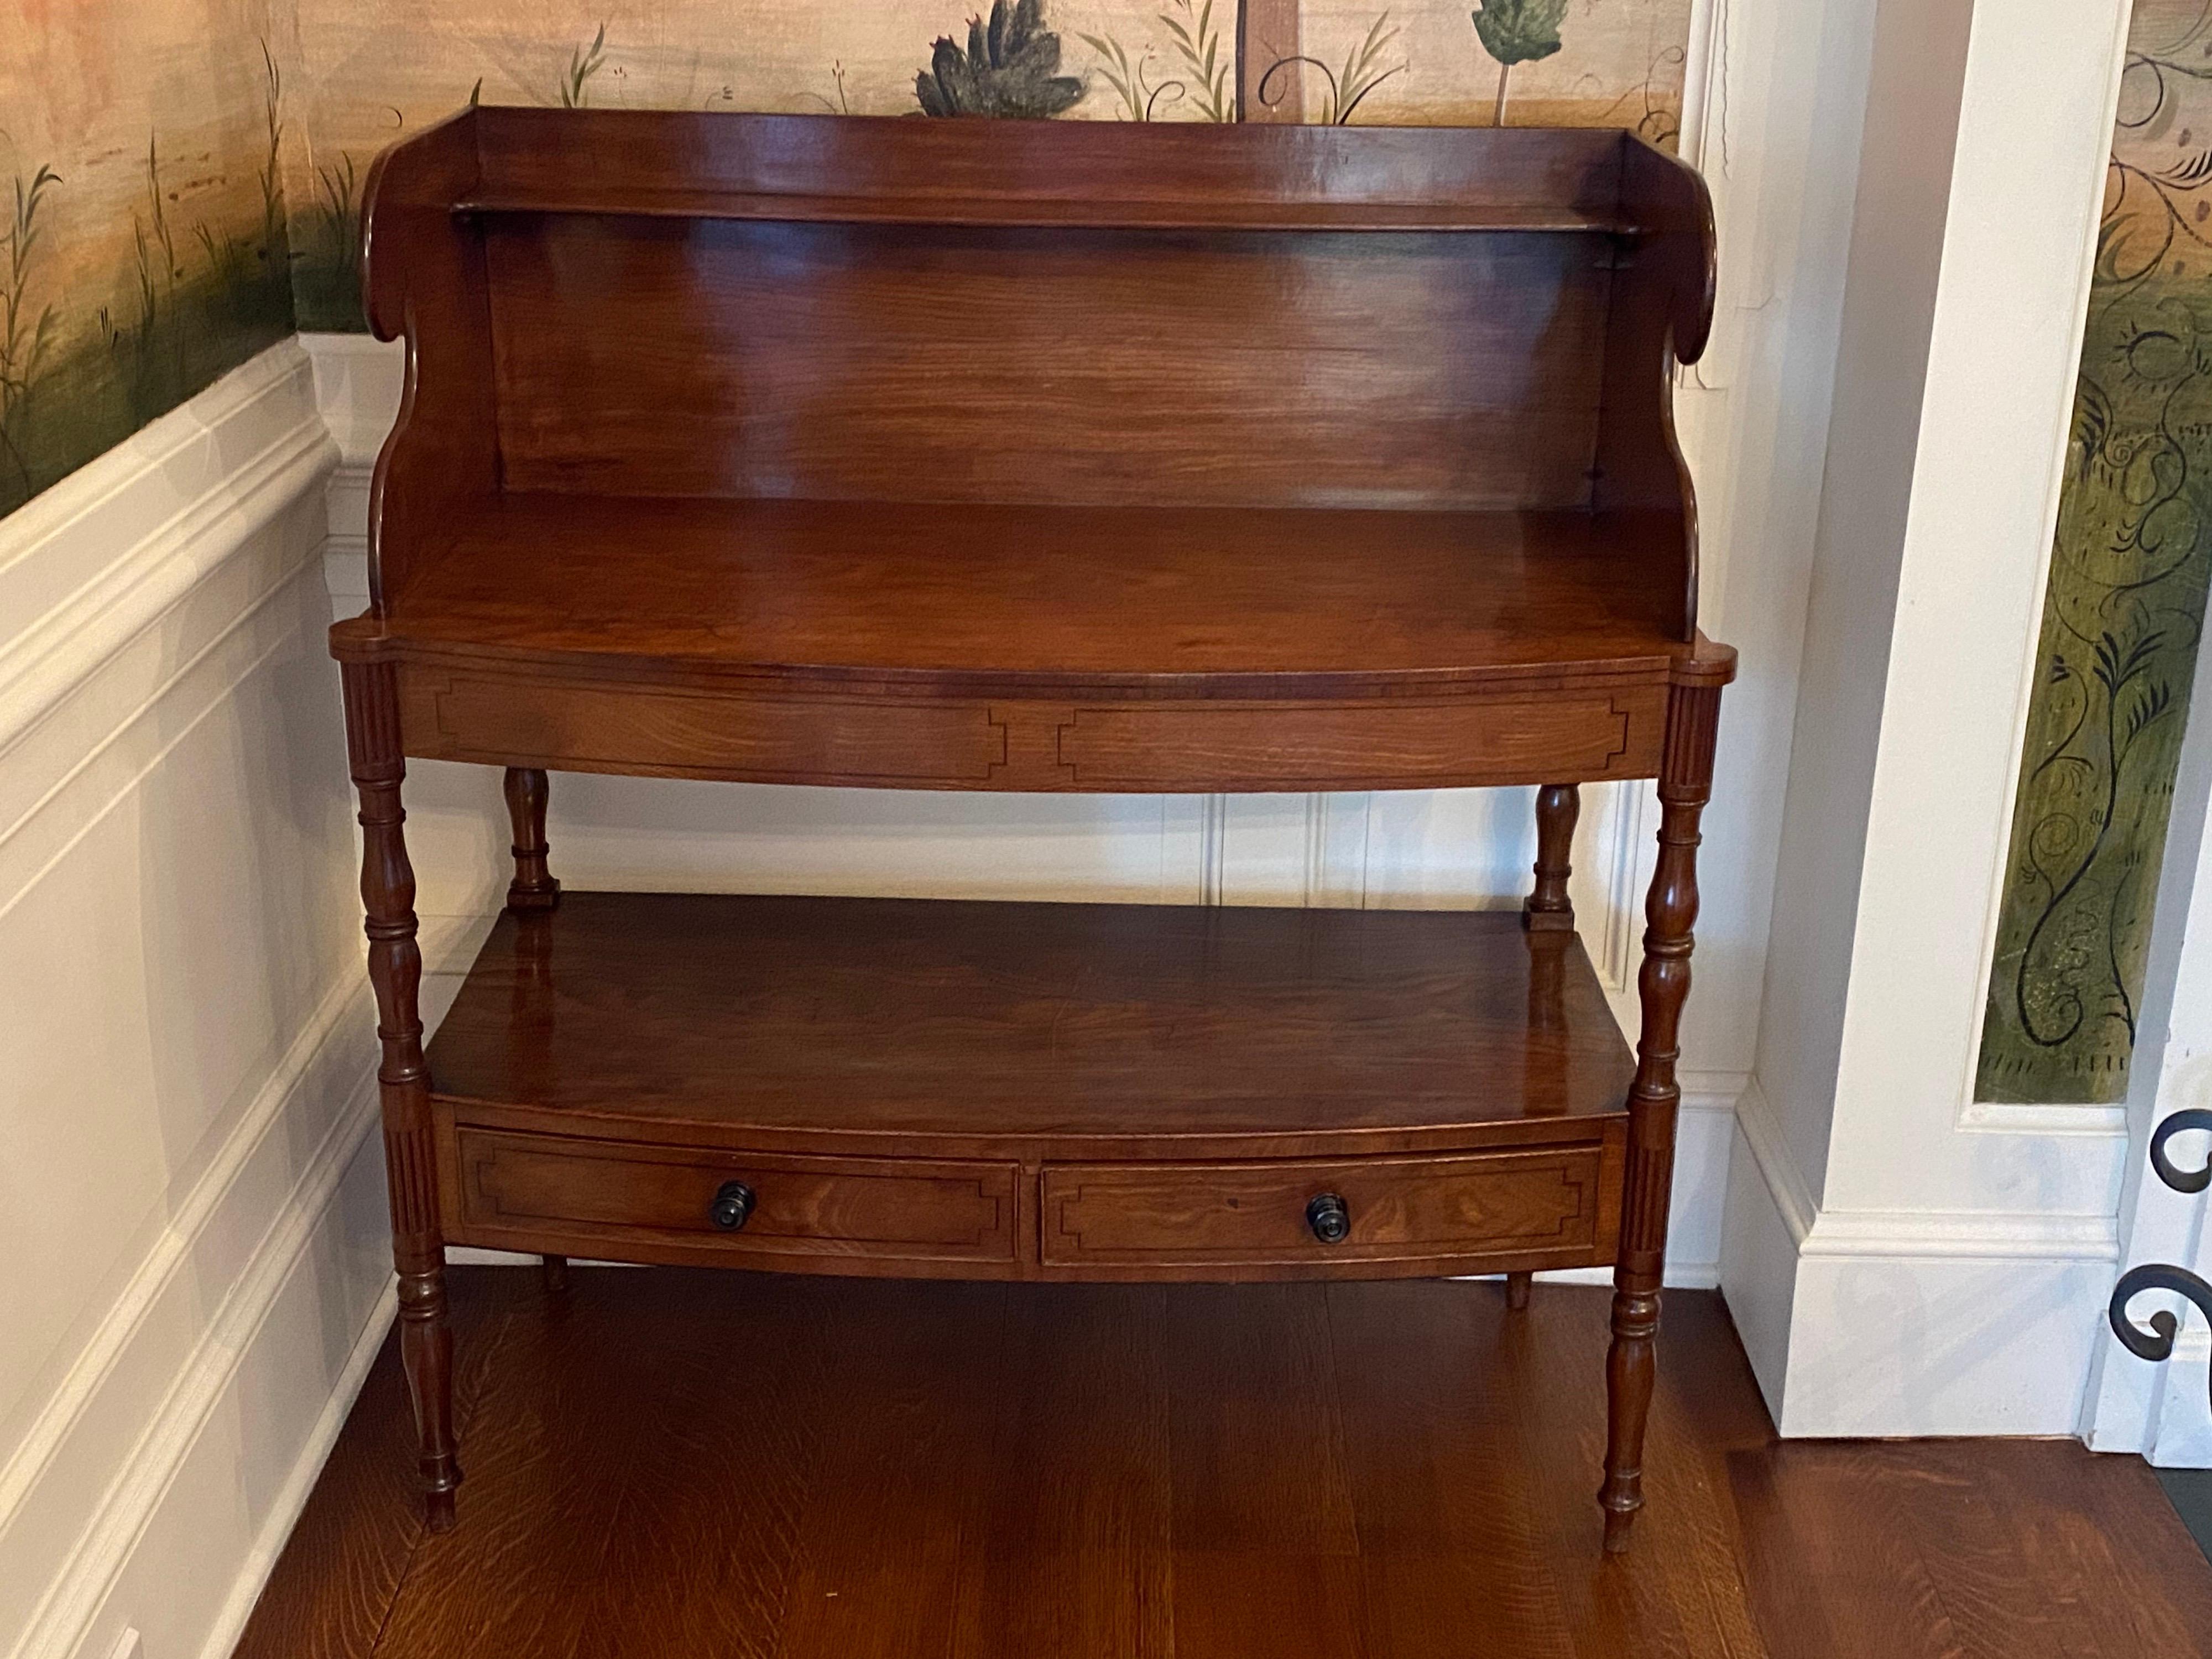 Regency mahogany wash stand, circa 1810
The bow-fronted top flanked by tall shaped superstructure above a conforming frieze raised on baluster-turned tapering legs joined by a platform stretcher fitted with a pair of short drawers.
Measures: